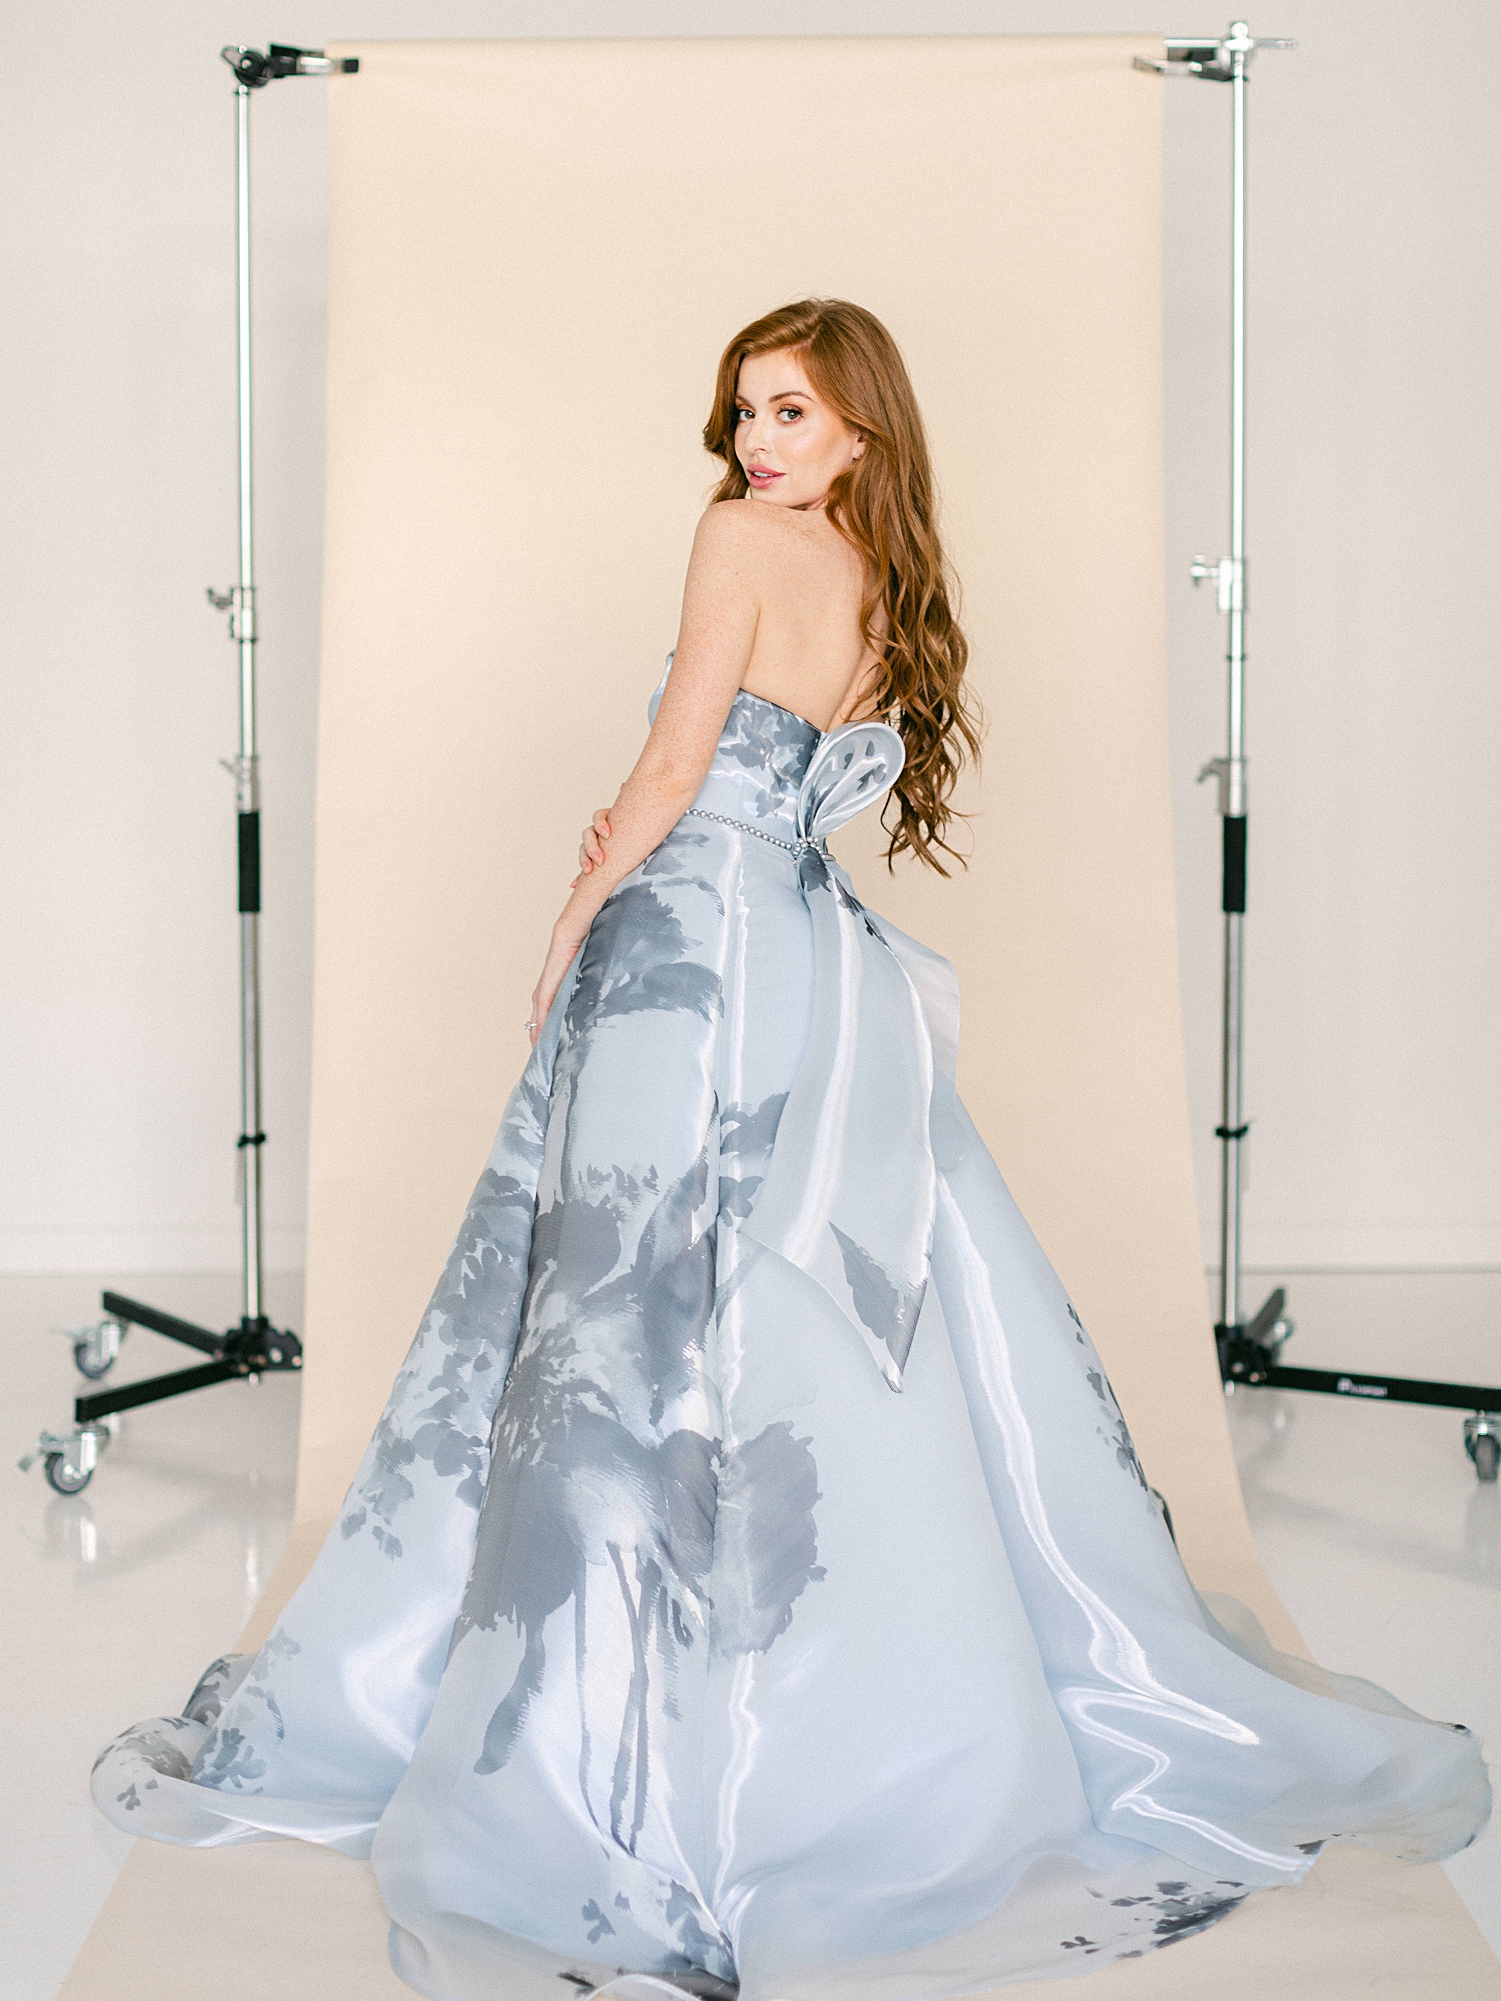 Blue floral ball gown worn by redhead woman looking over shoulder in front of tan backdrop